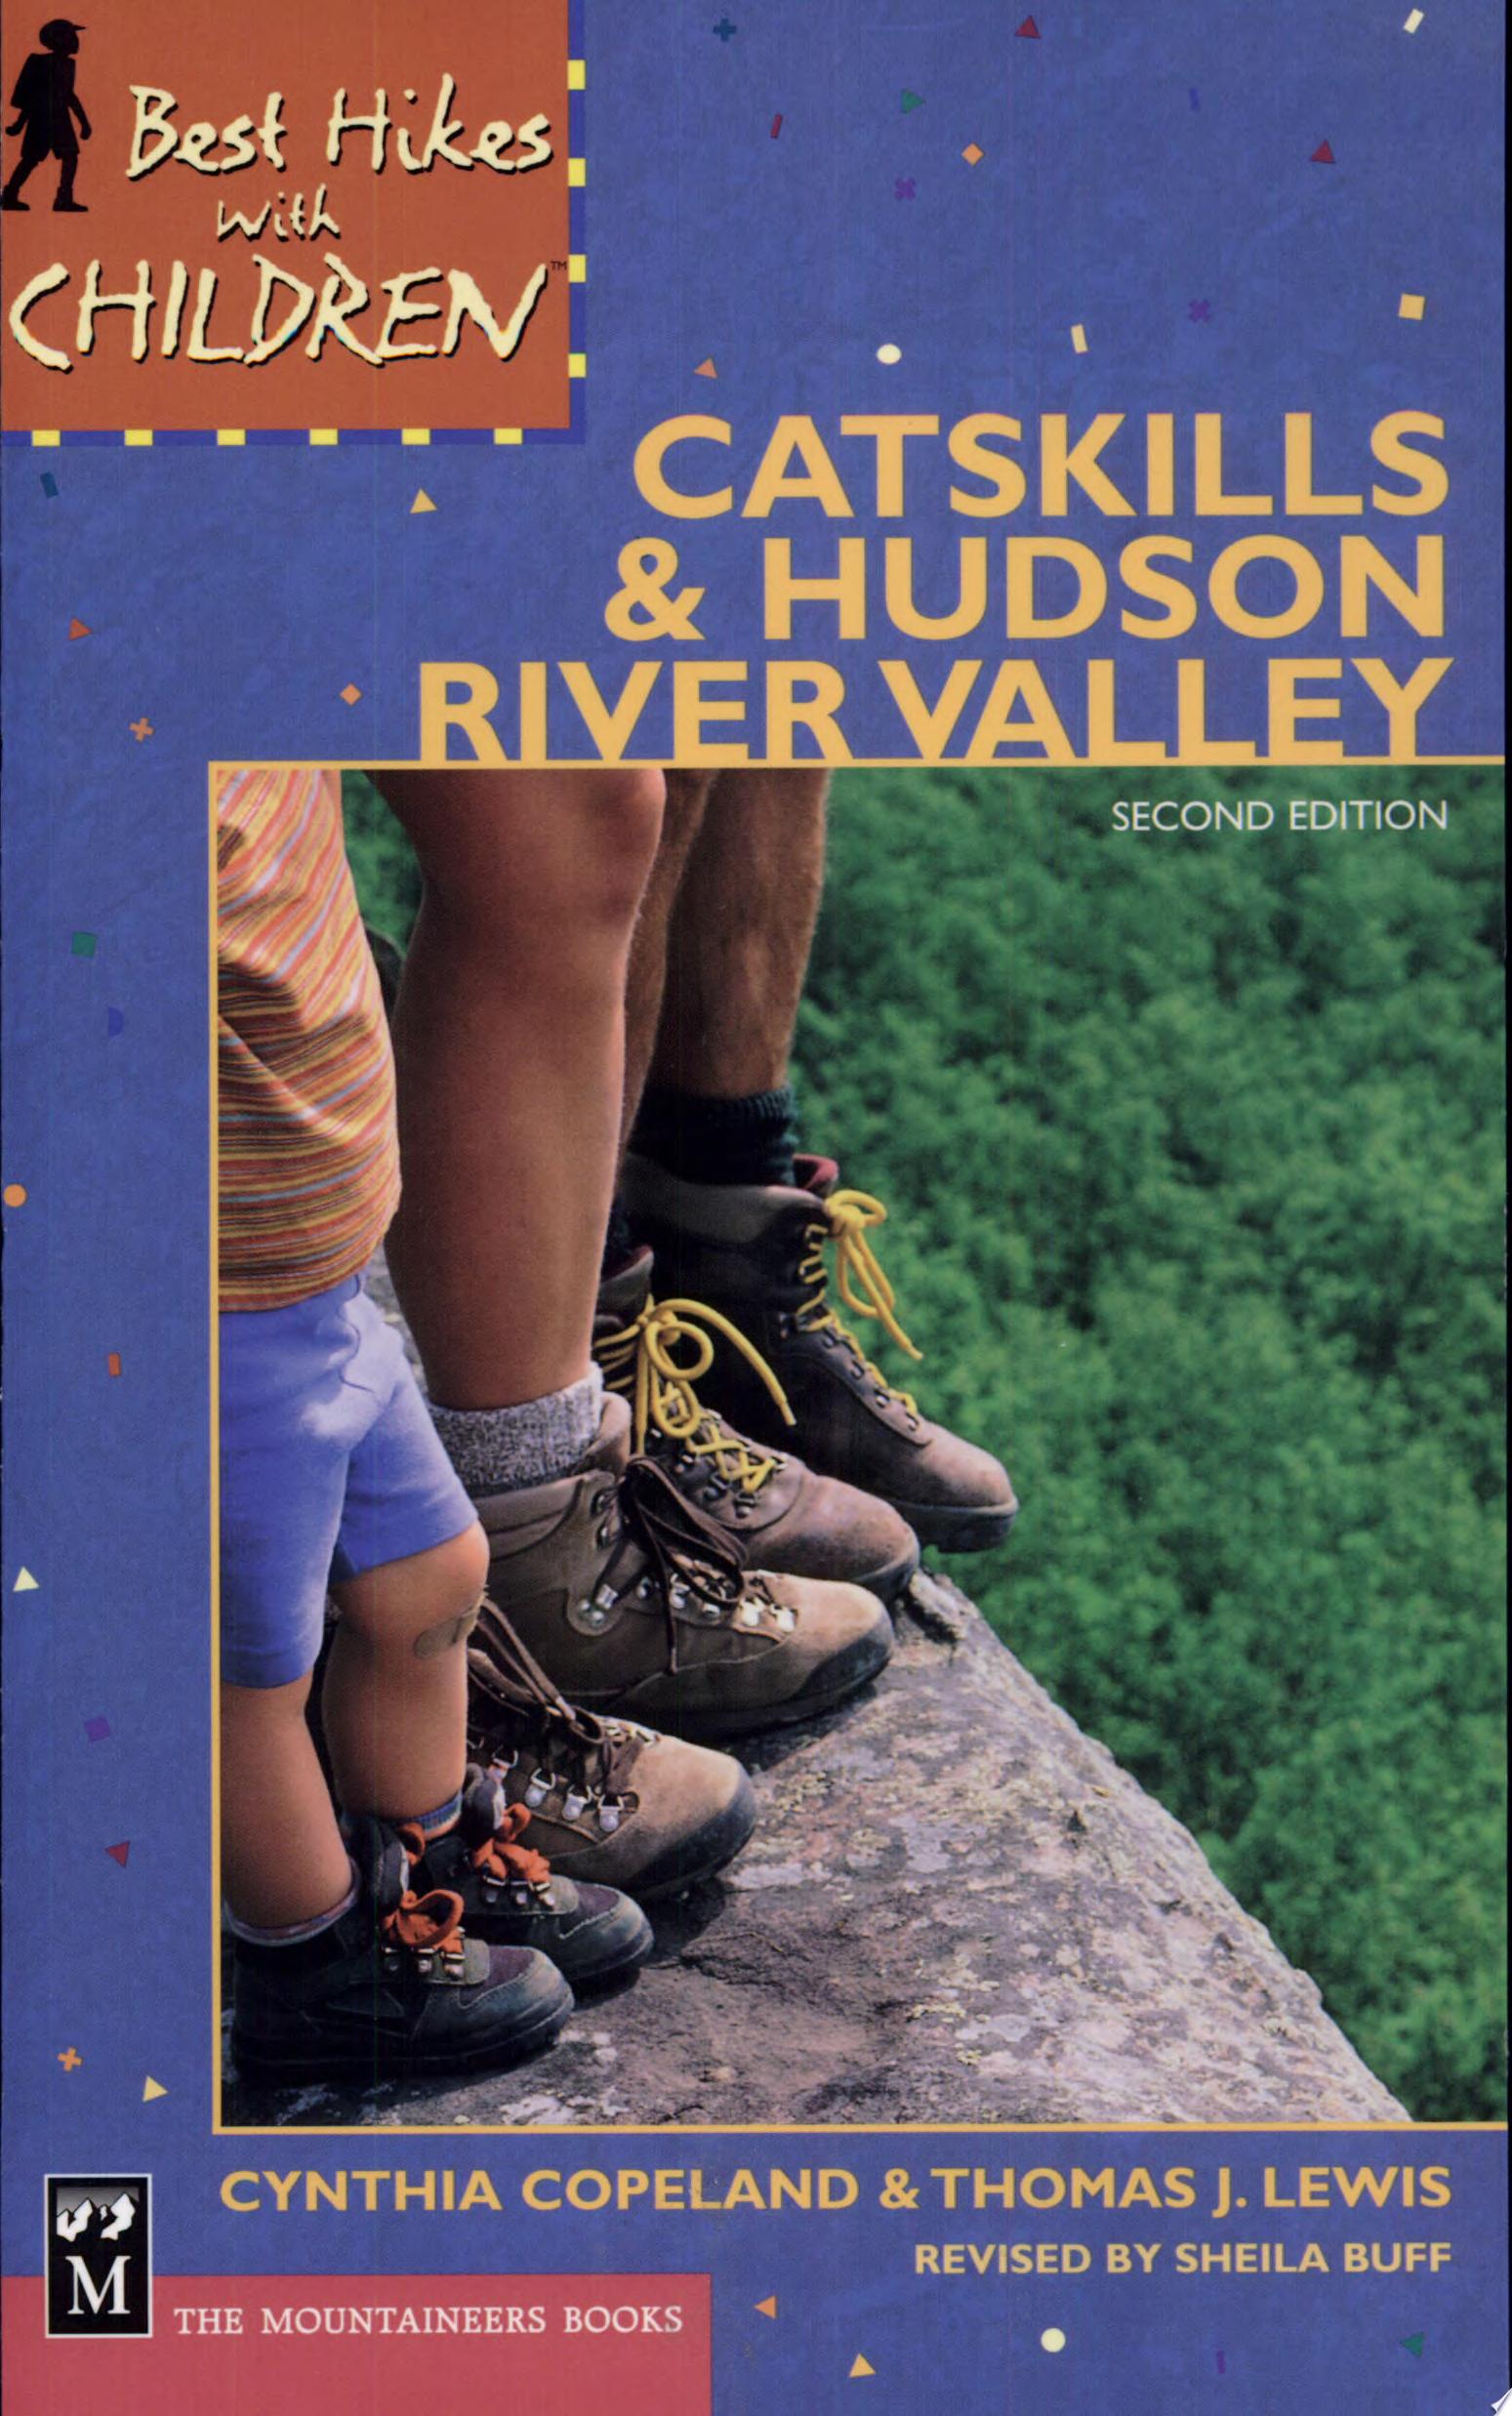 Image for "Best Hikes with Children in the Catskills and Hudson River Valley"